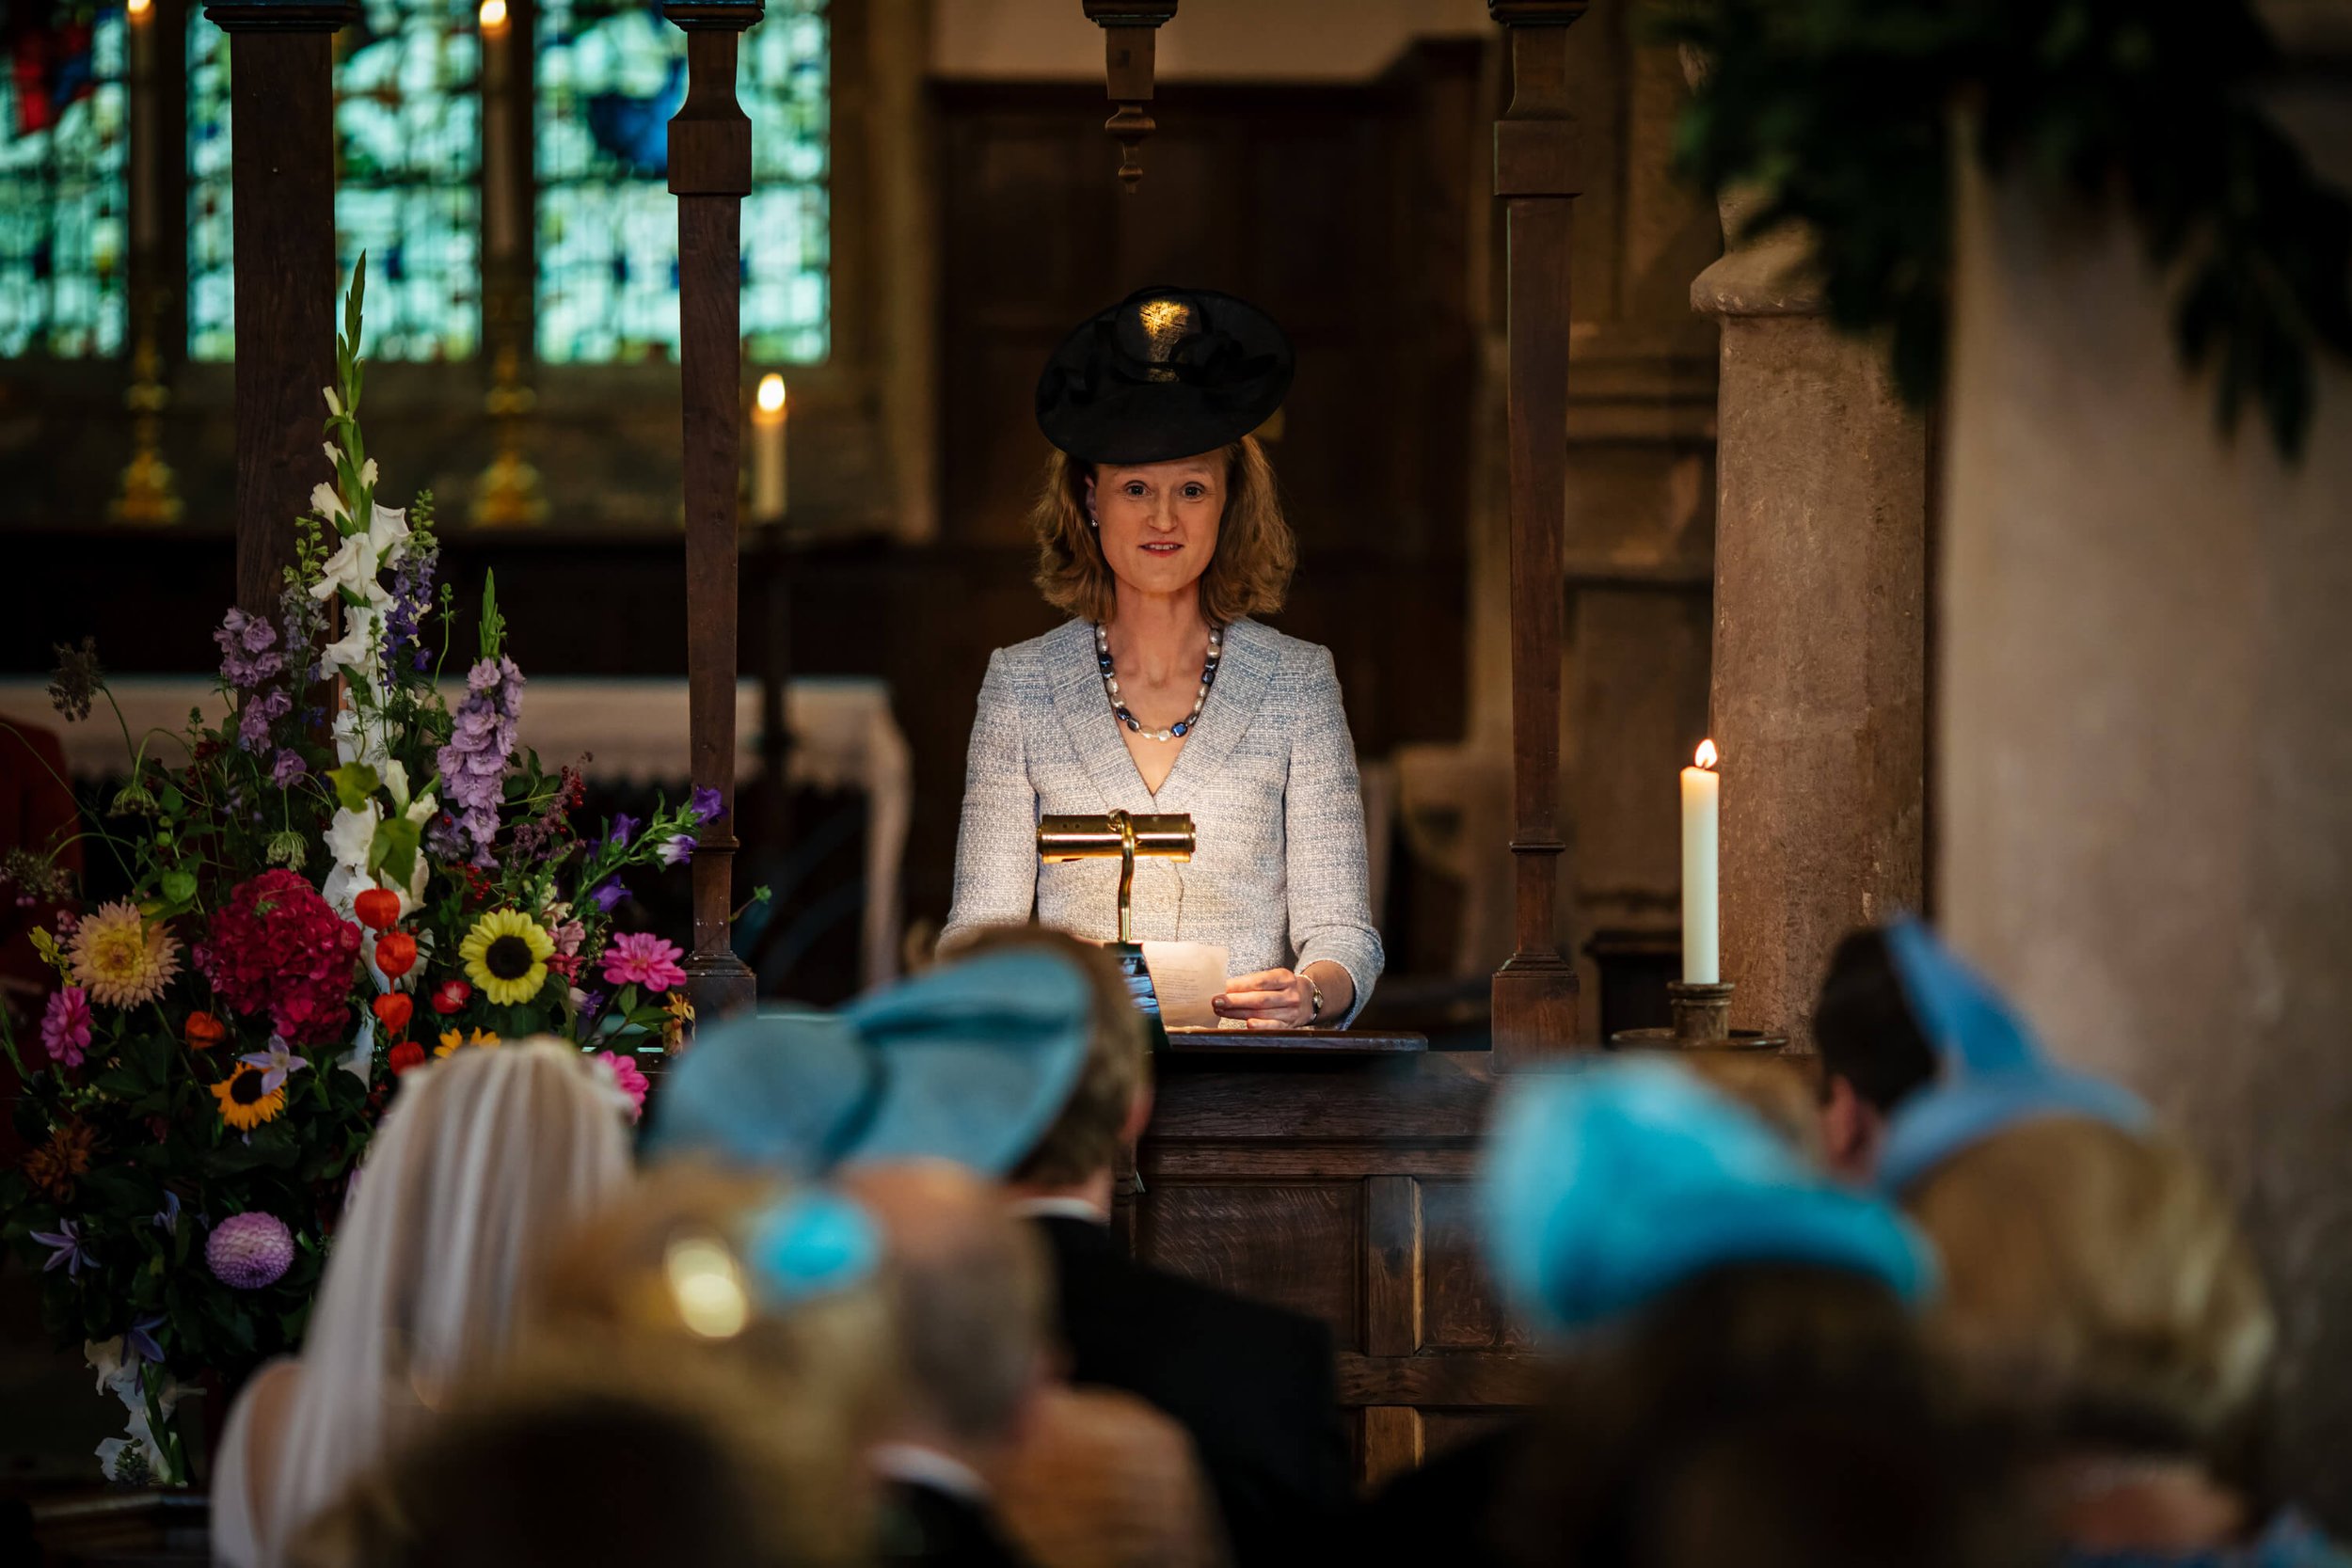 Mother of the bride performs a reading during the wedding ceremony